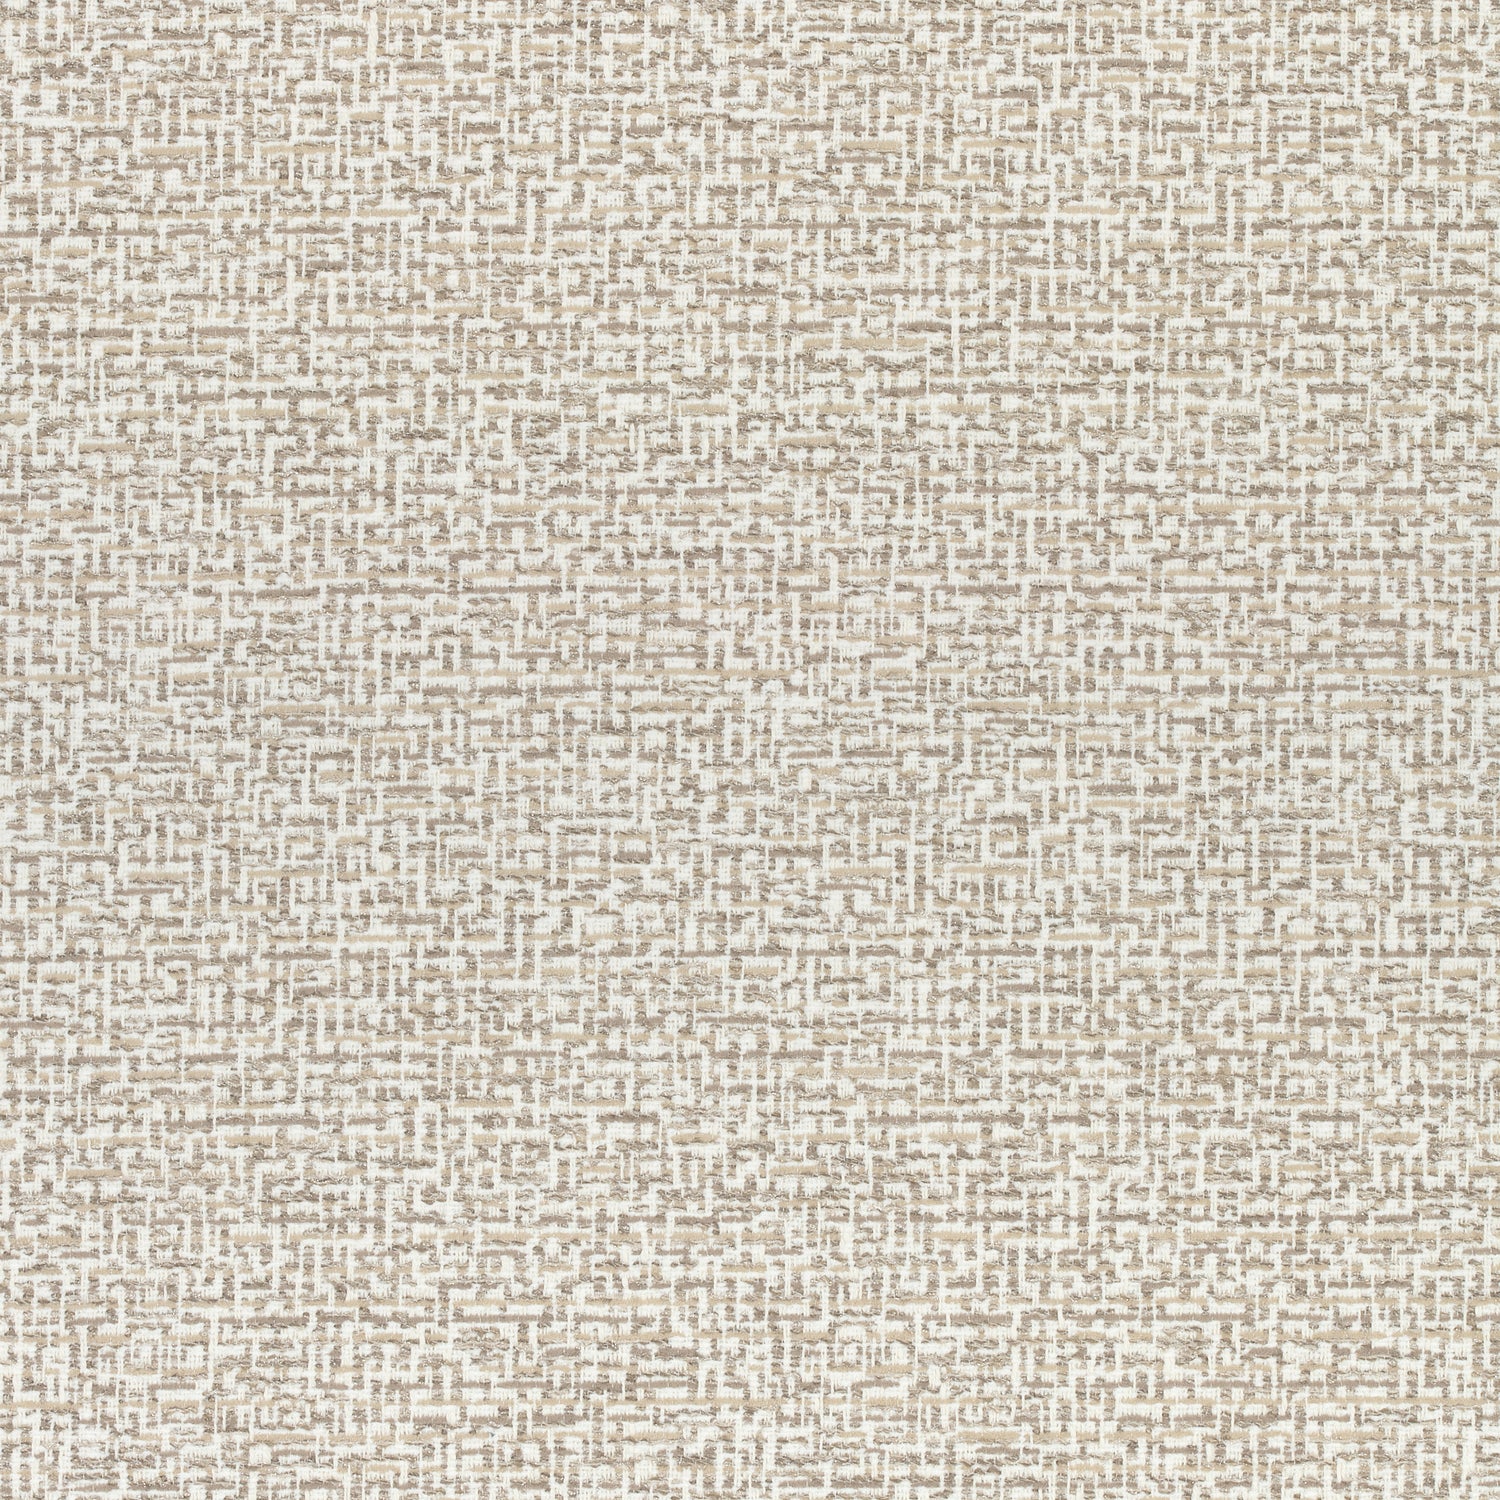 Mandela fabric in sand color - pattern number W74050 - by Thibaut in the Cadence collection